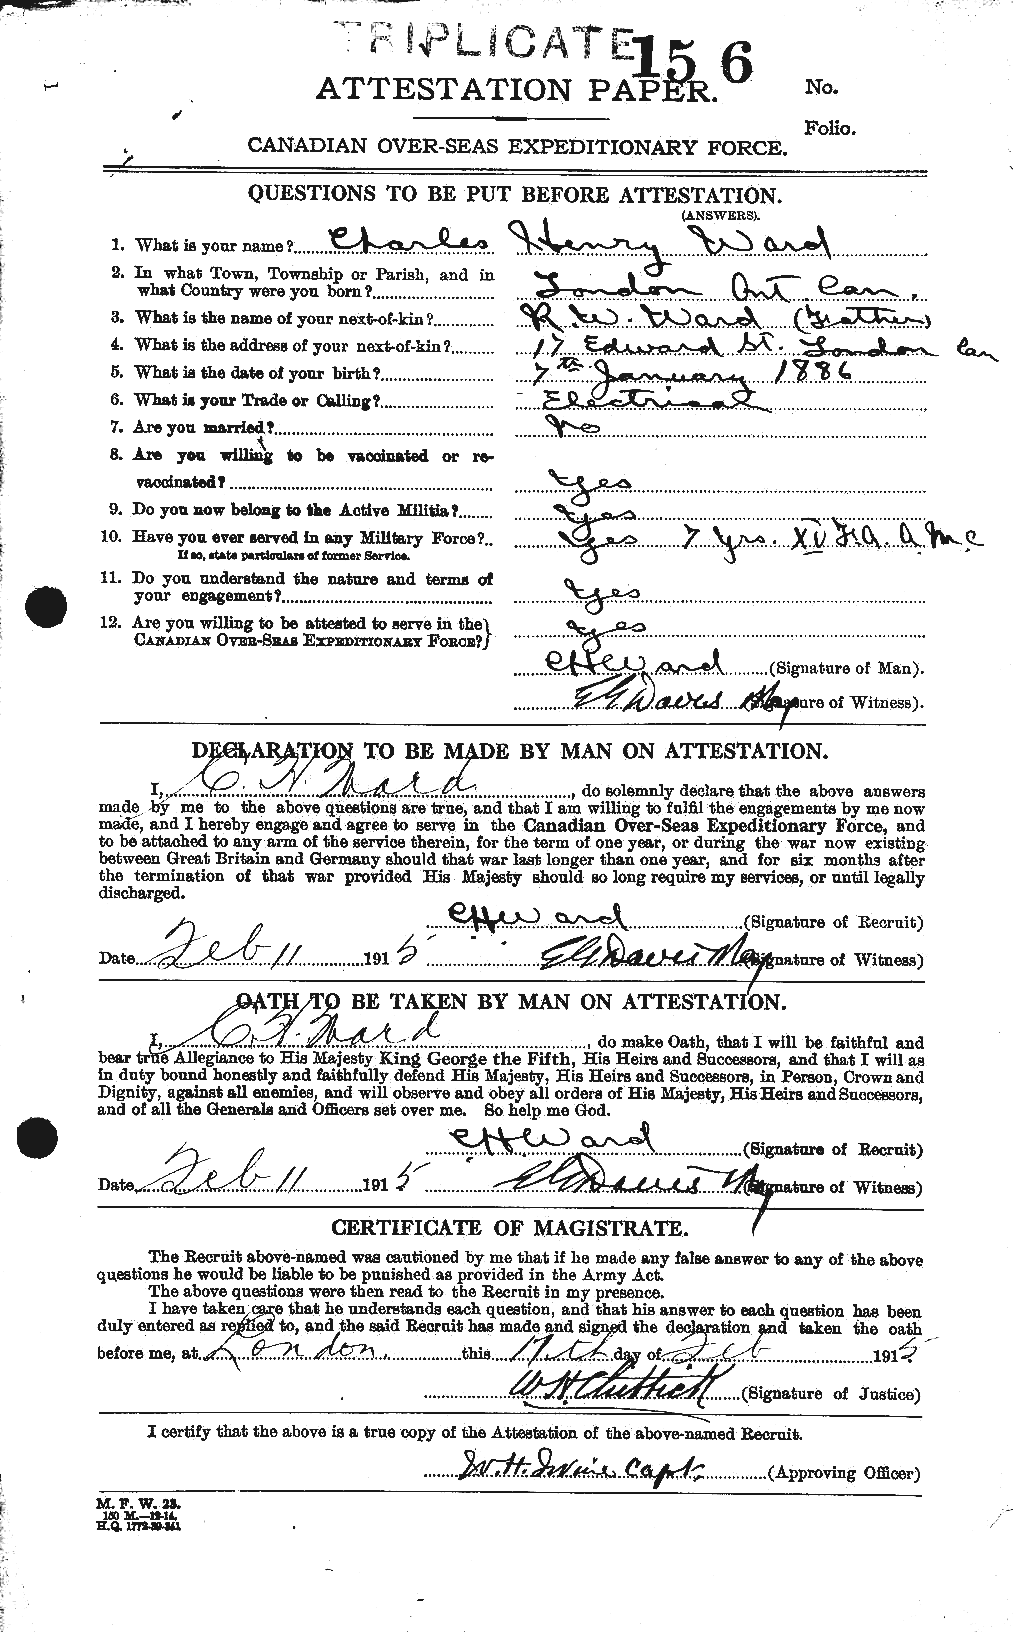 Personnel Records of the First World War - CEF 657584a